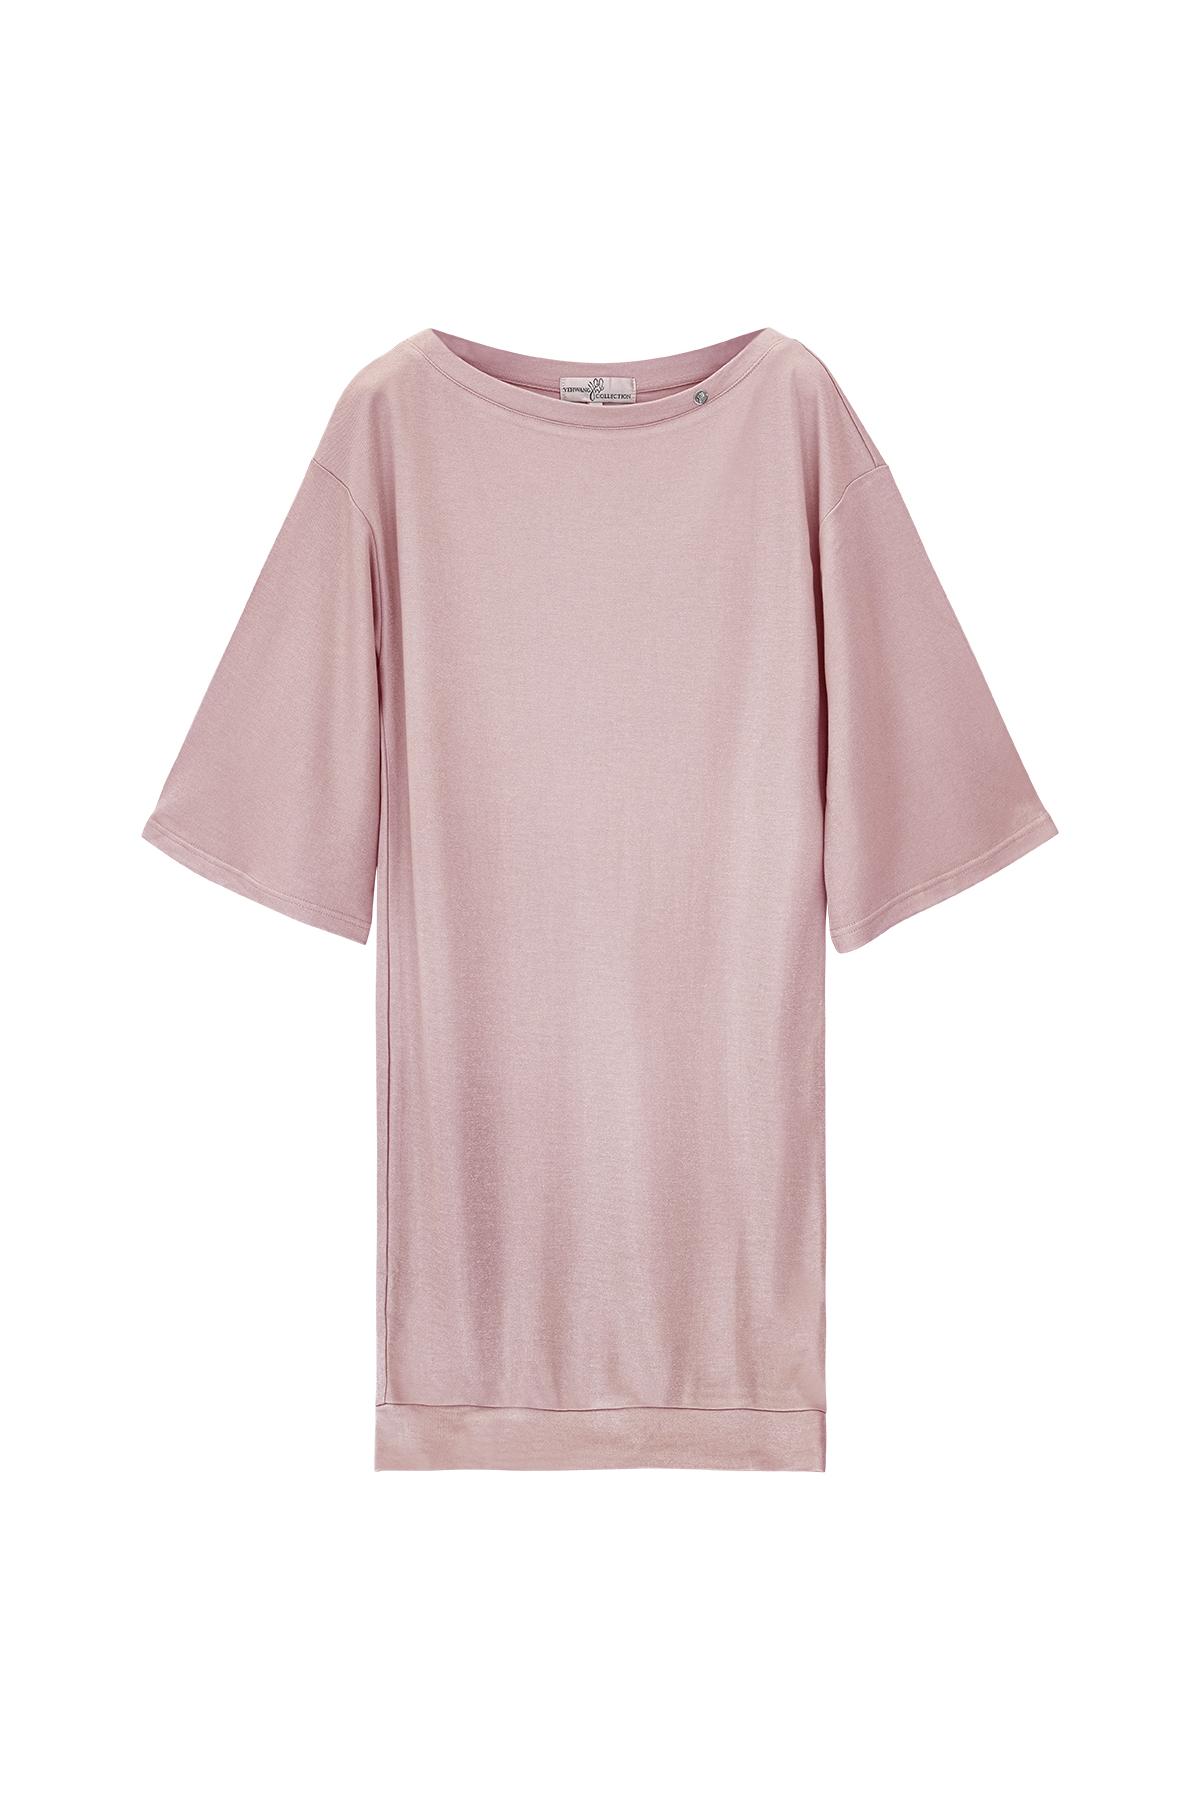 T-shirt dress with shiny coating Pink S